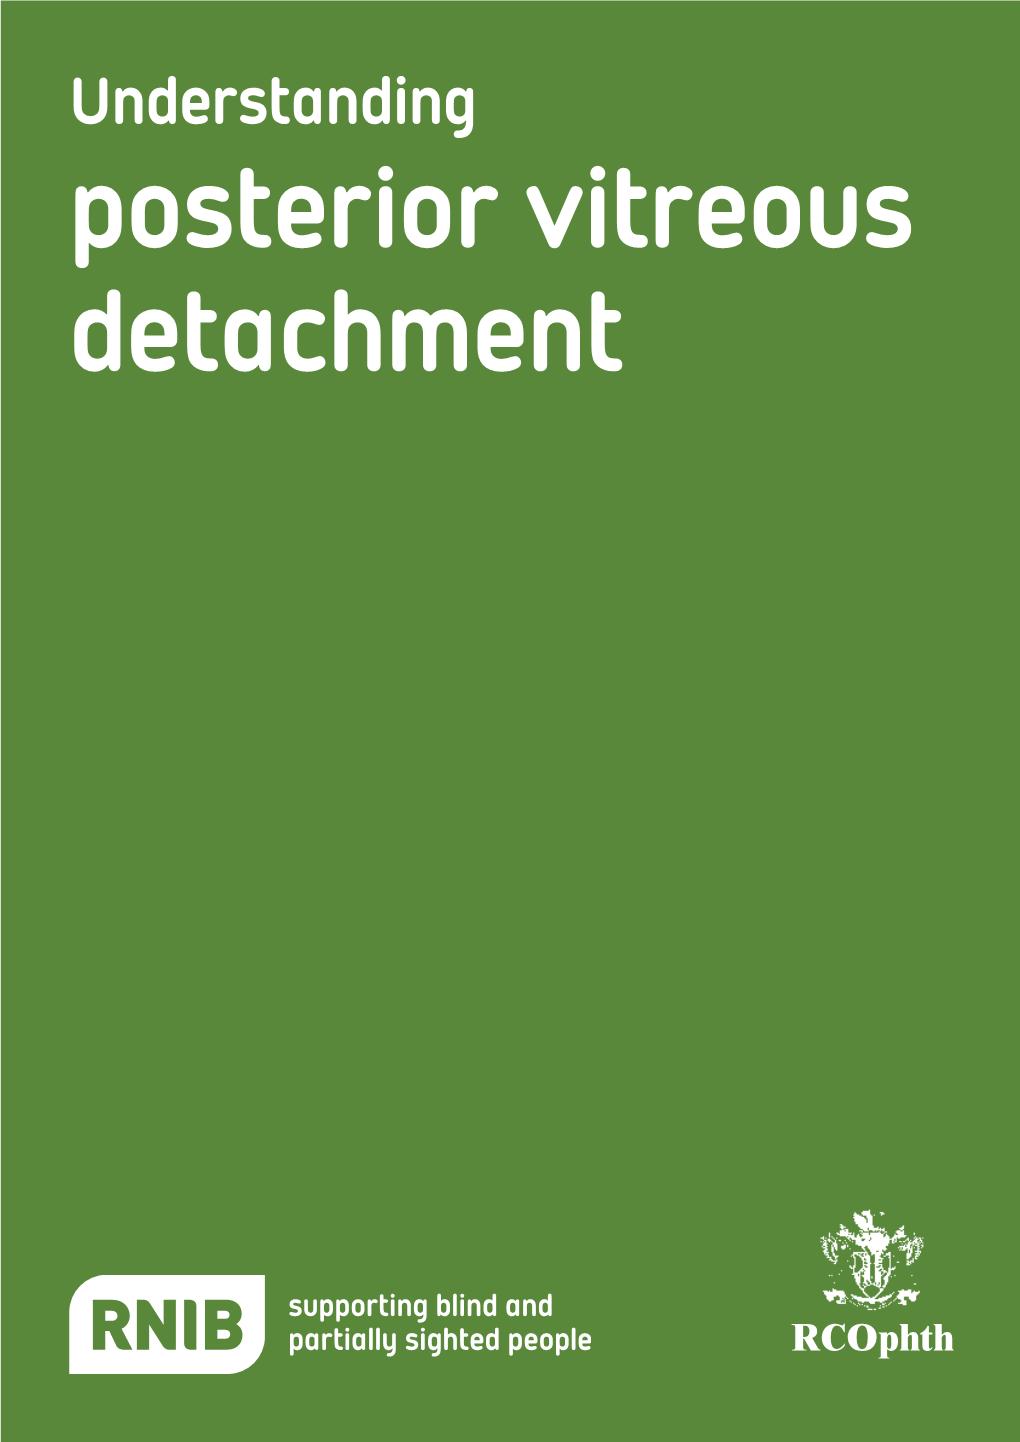 Posterior Vitreous Detachment and the Eye When We Look at Something, Light Passes Through the Front of the Eye, and Is Focused by the Lens Onto the Retina